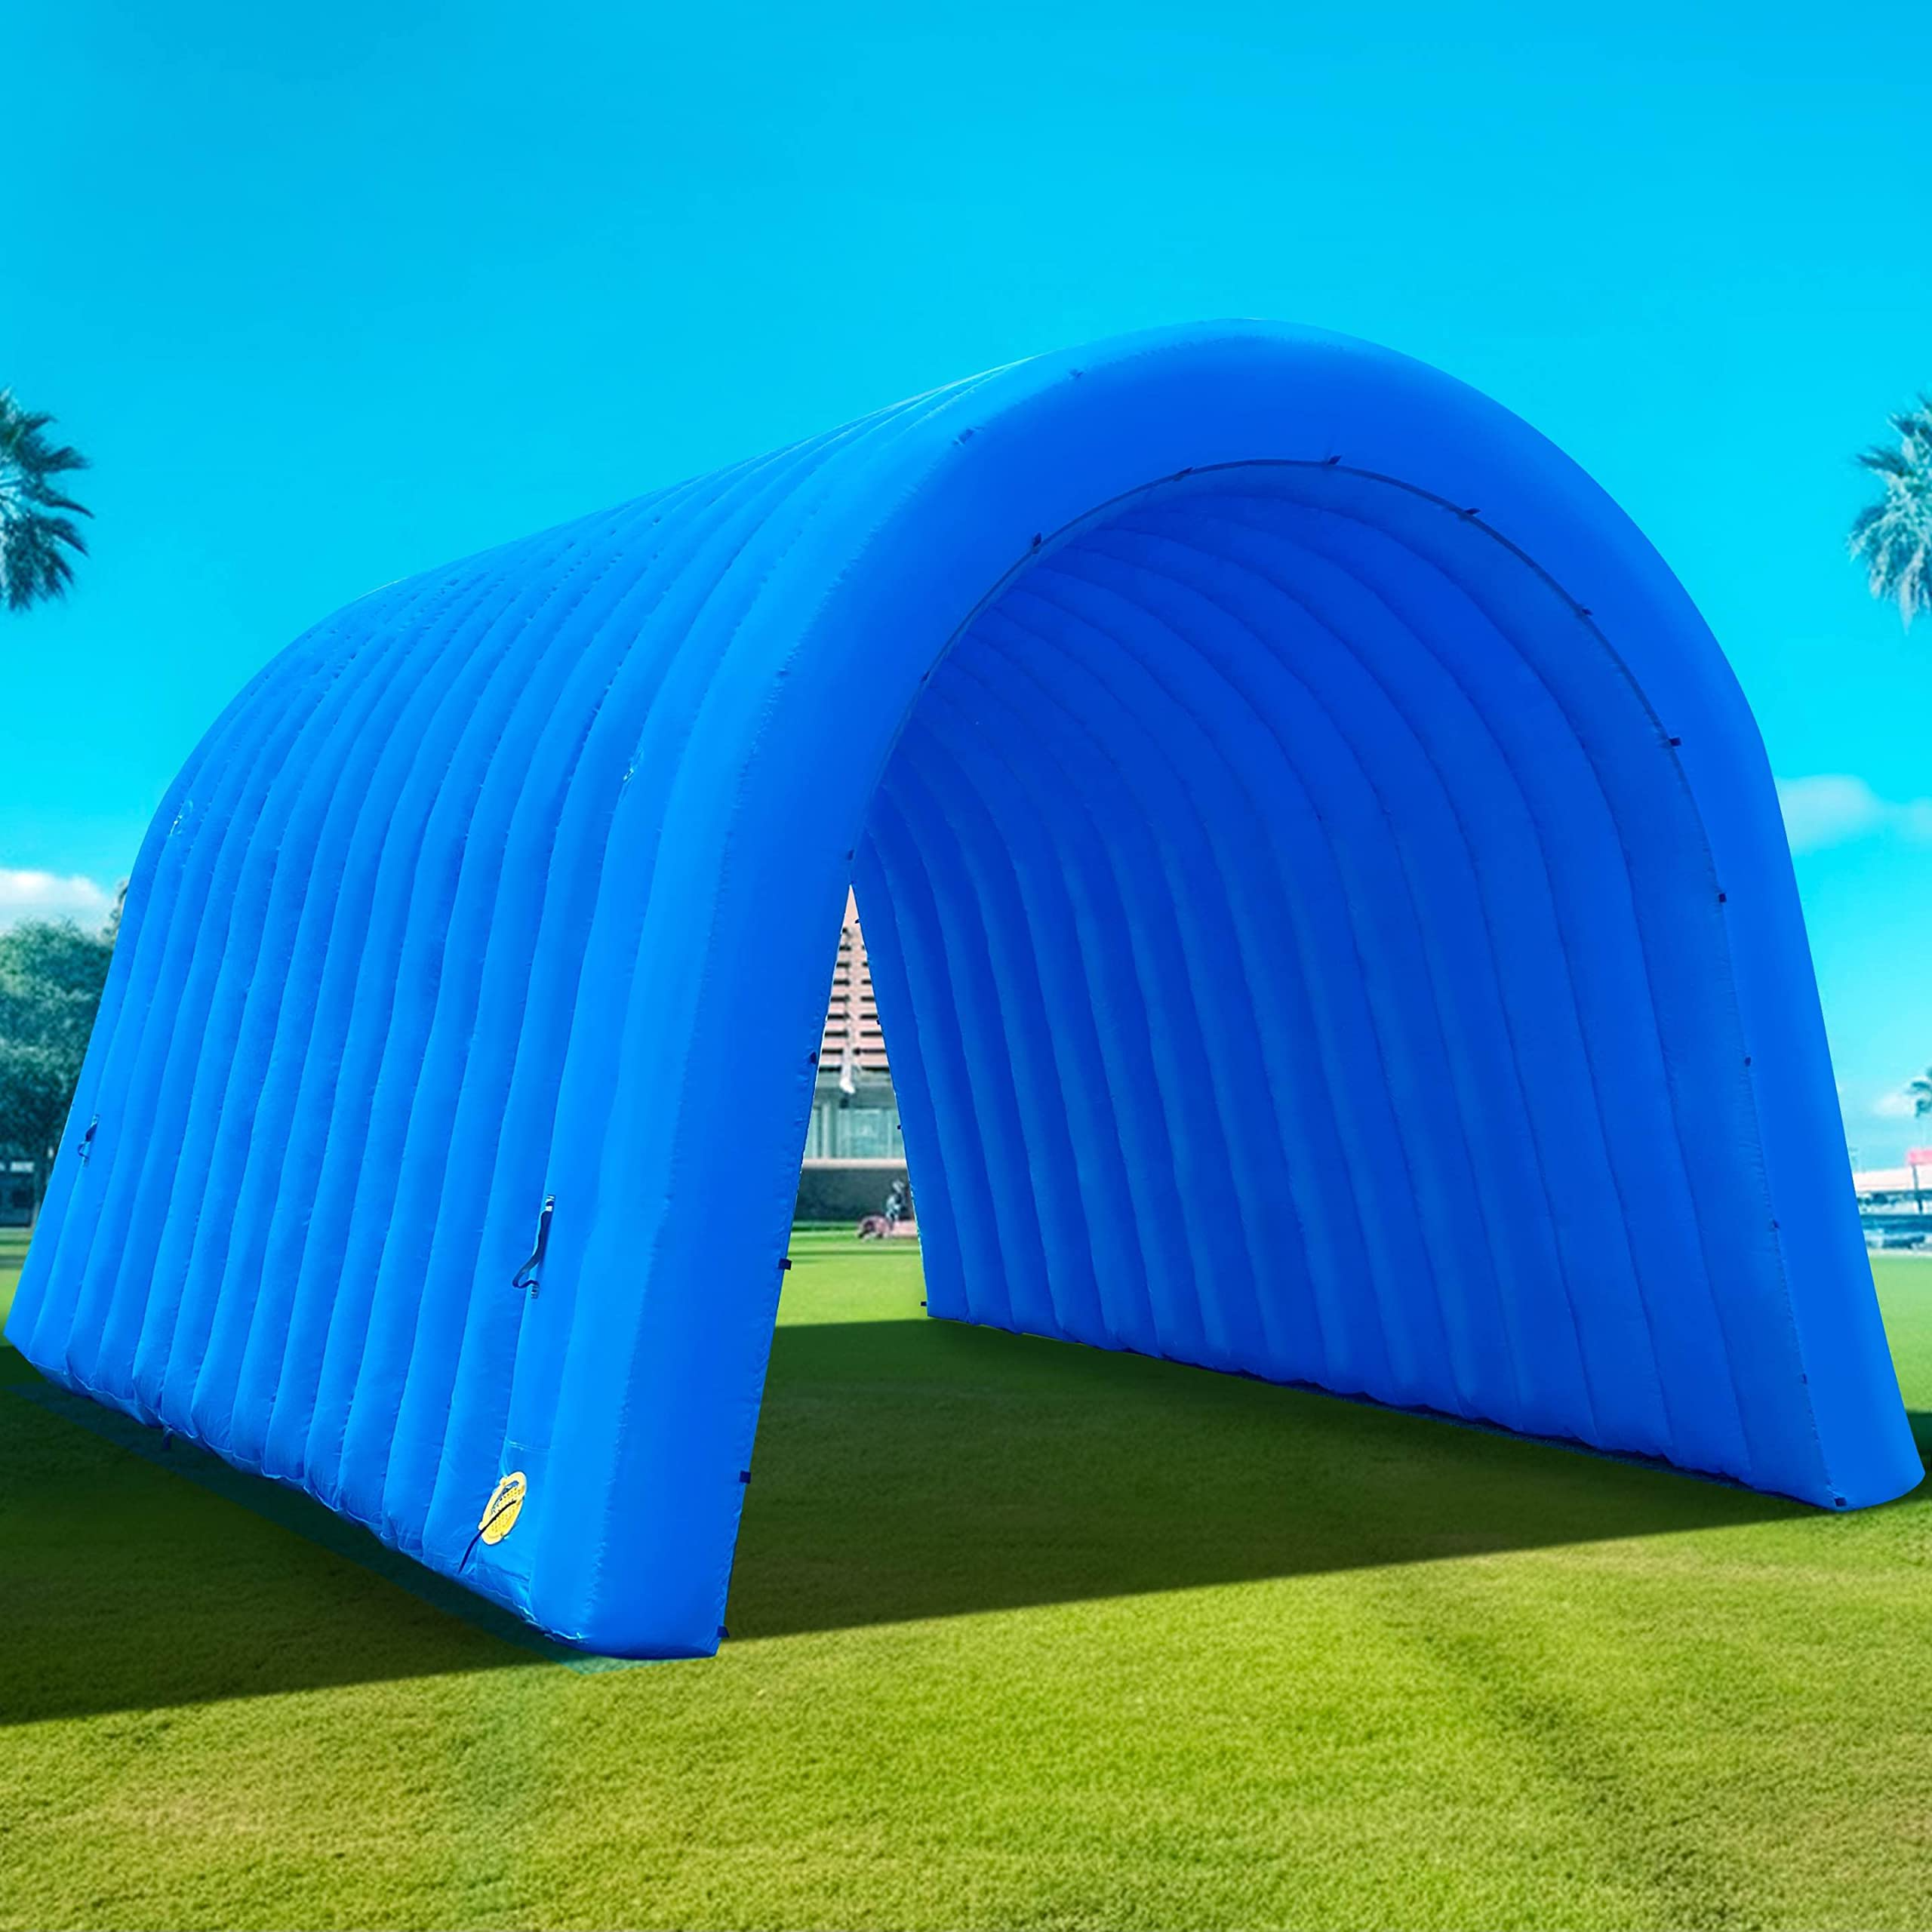 OZIS Inflatable Tunnel Sports Tunnel Entrance with Installed Blower Inflatable Tunnel Tent for Business Advertising Event Exhibition Promotion,Street,Shop,Supermarket,School(Blue, 16x10x10ft)